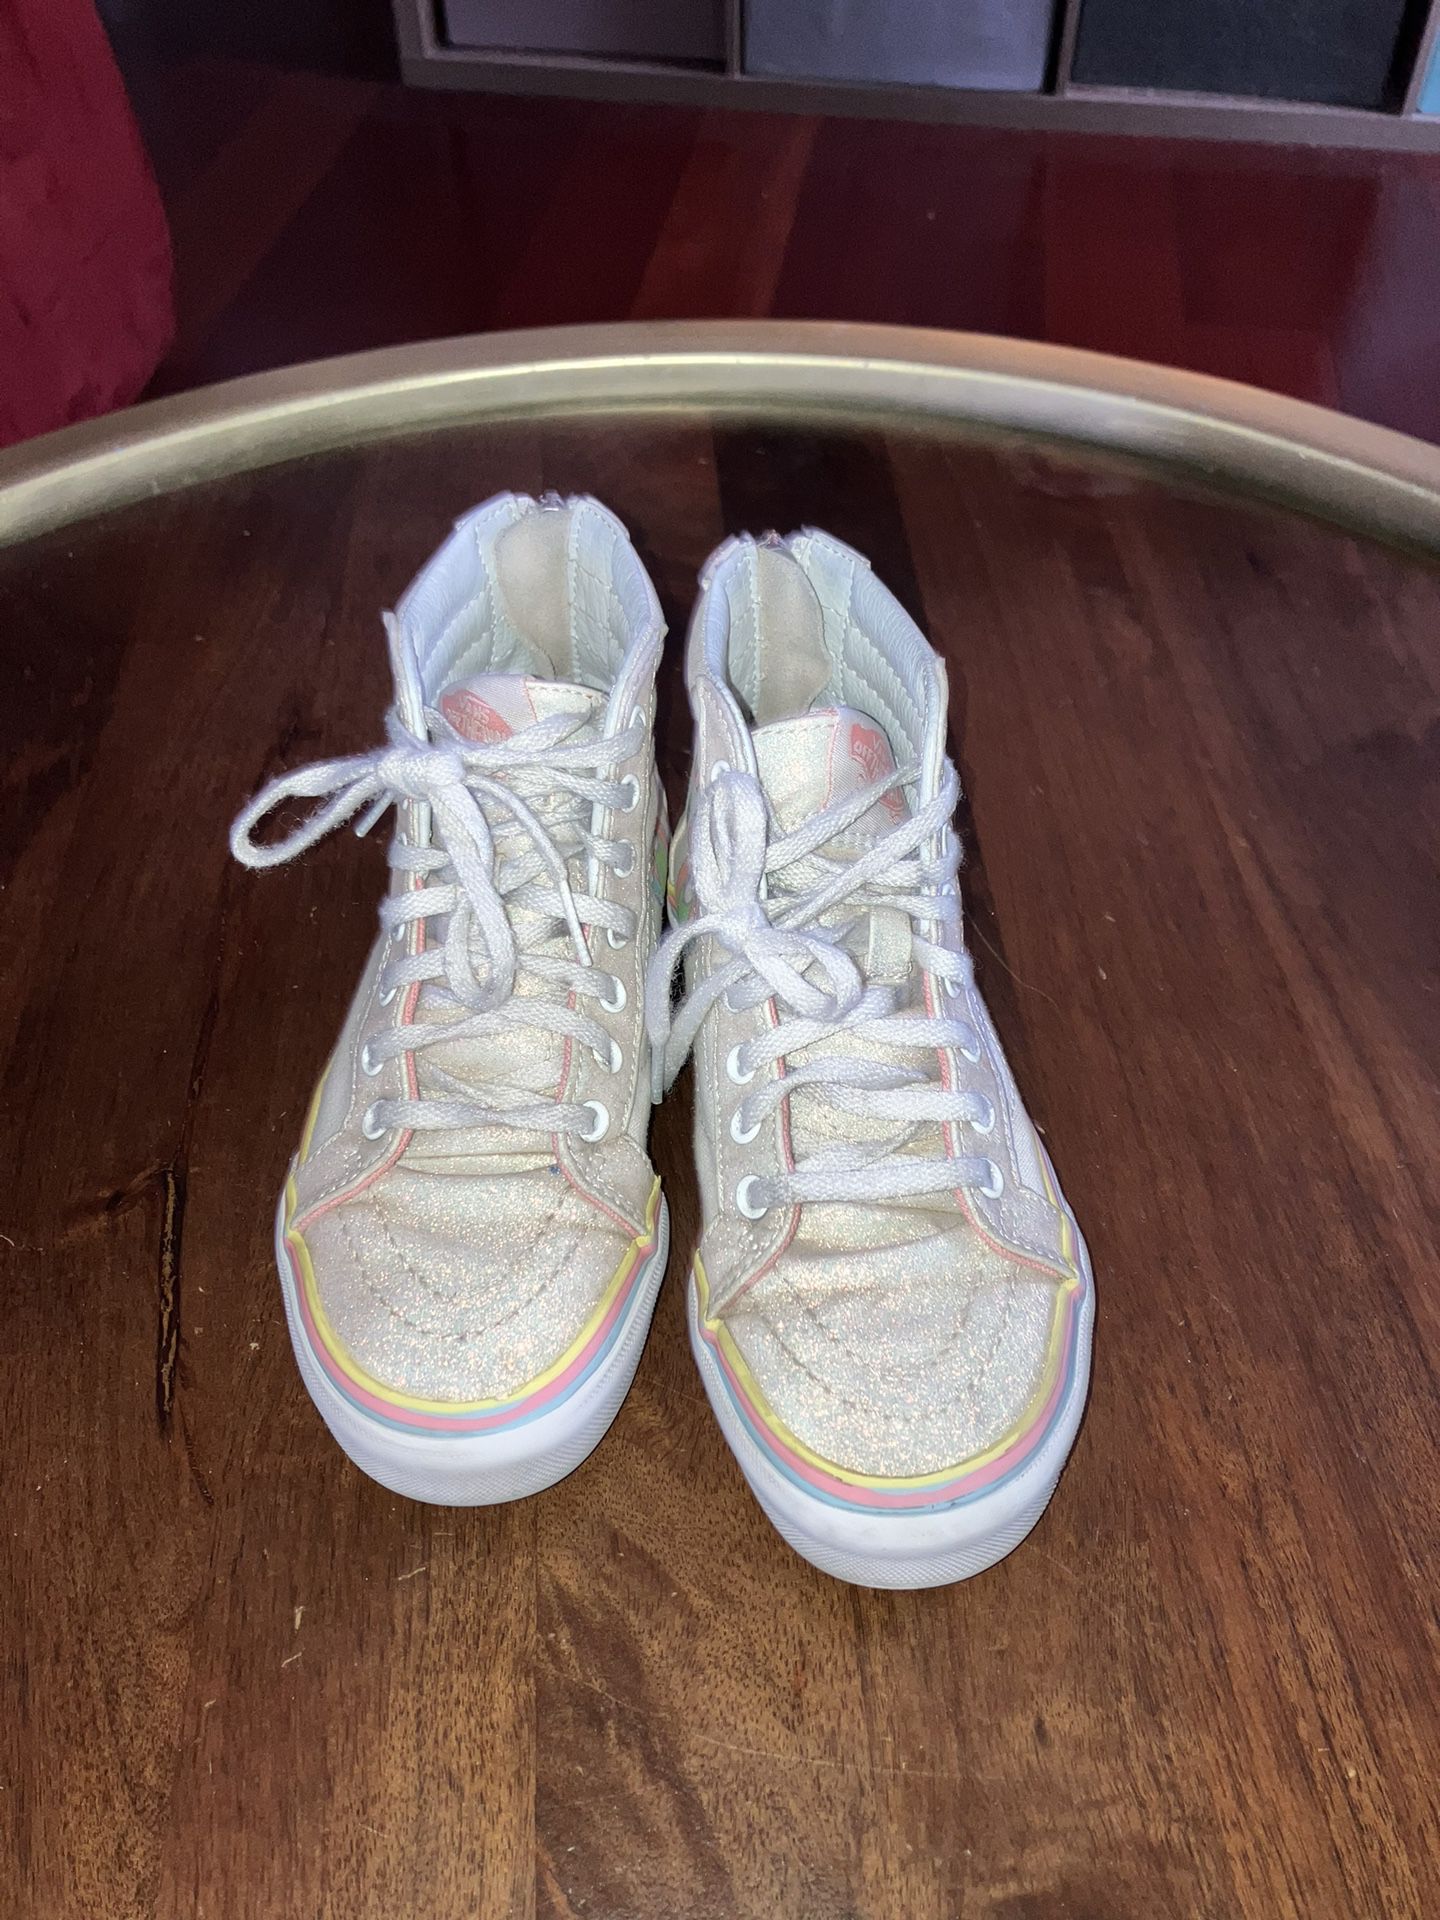 Vans Kids 721278 White Sk8 Hi Unicorn Lace Up Skate for in Minneapolis, MN - OfferUp